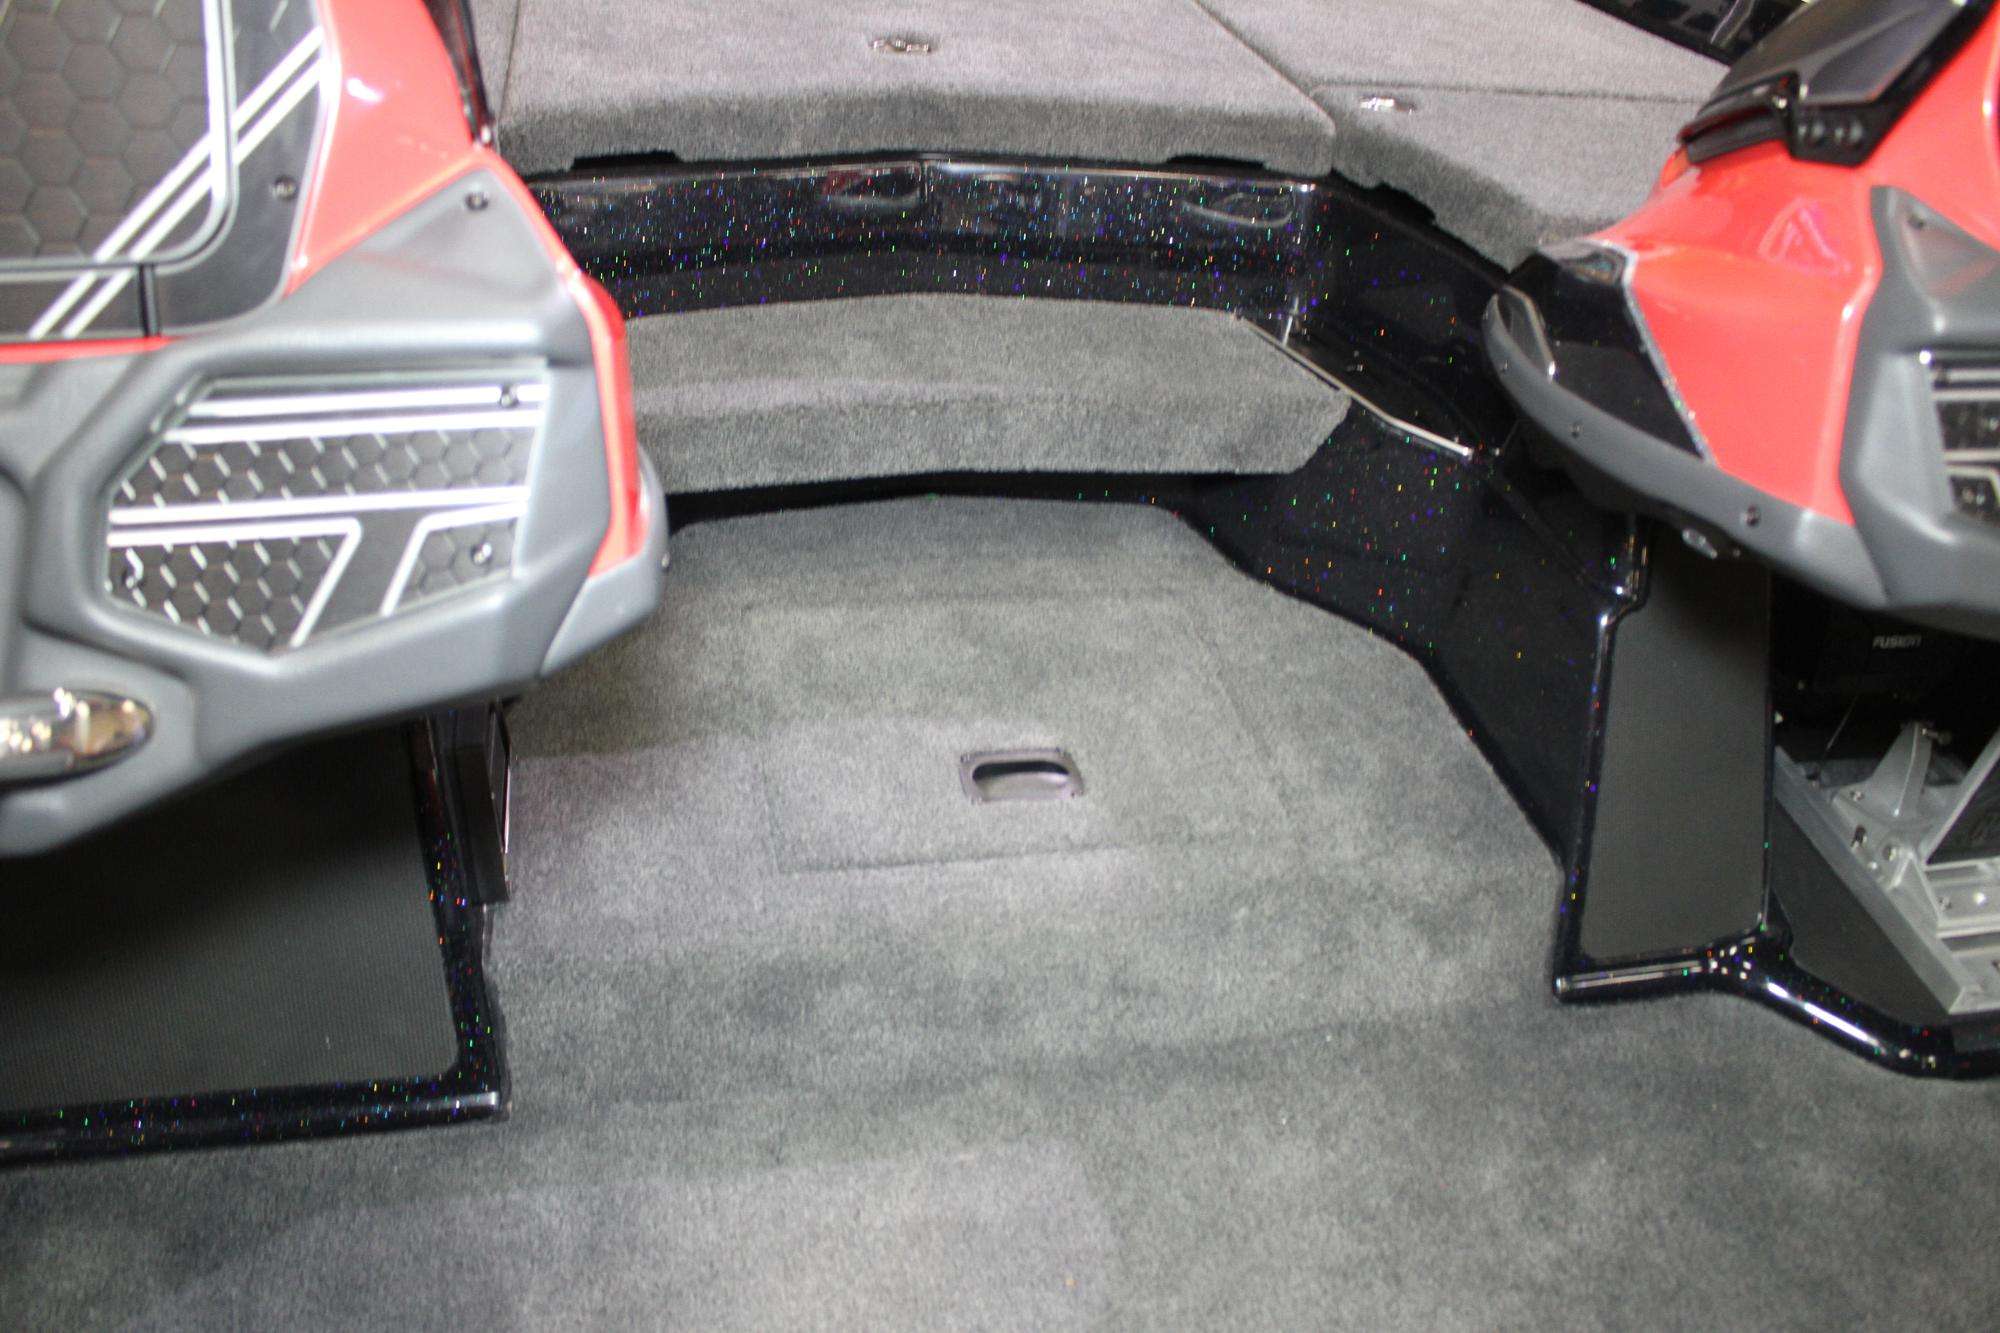 Wider walk space between the dual console models.